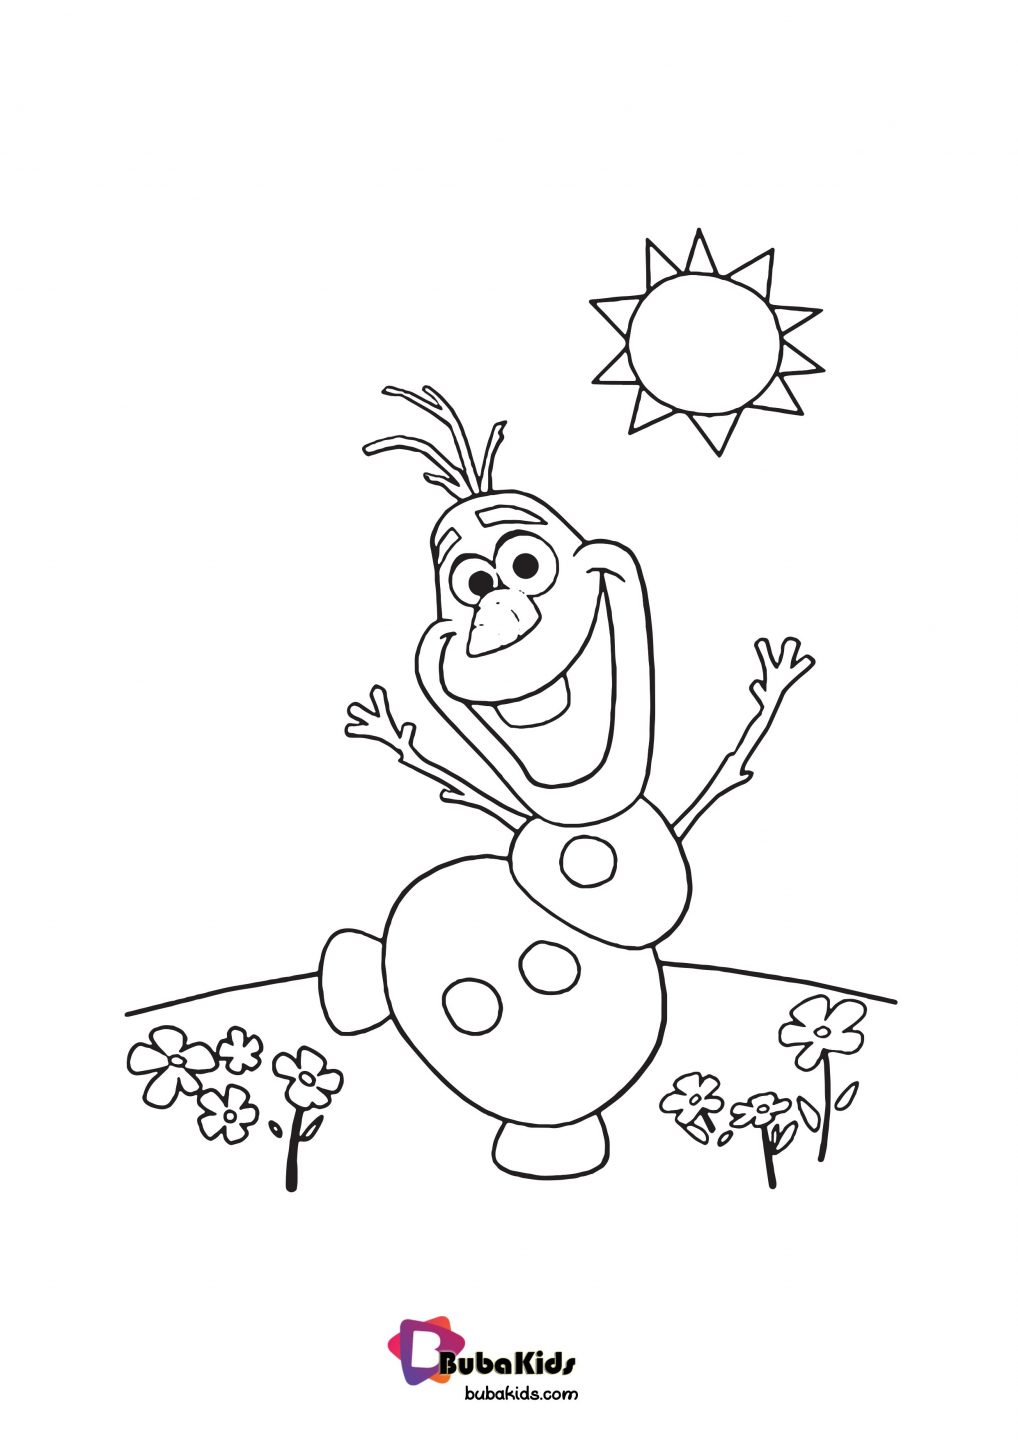 Funny Olaf Disney Coloring Page